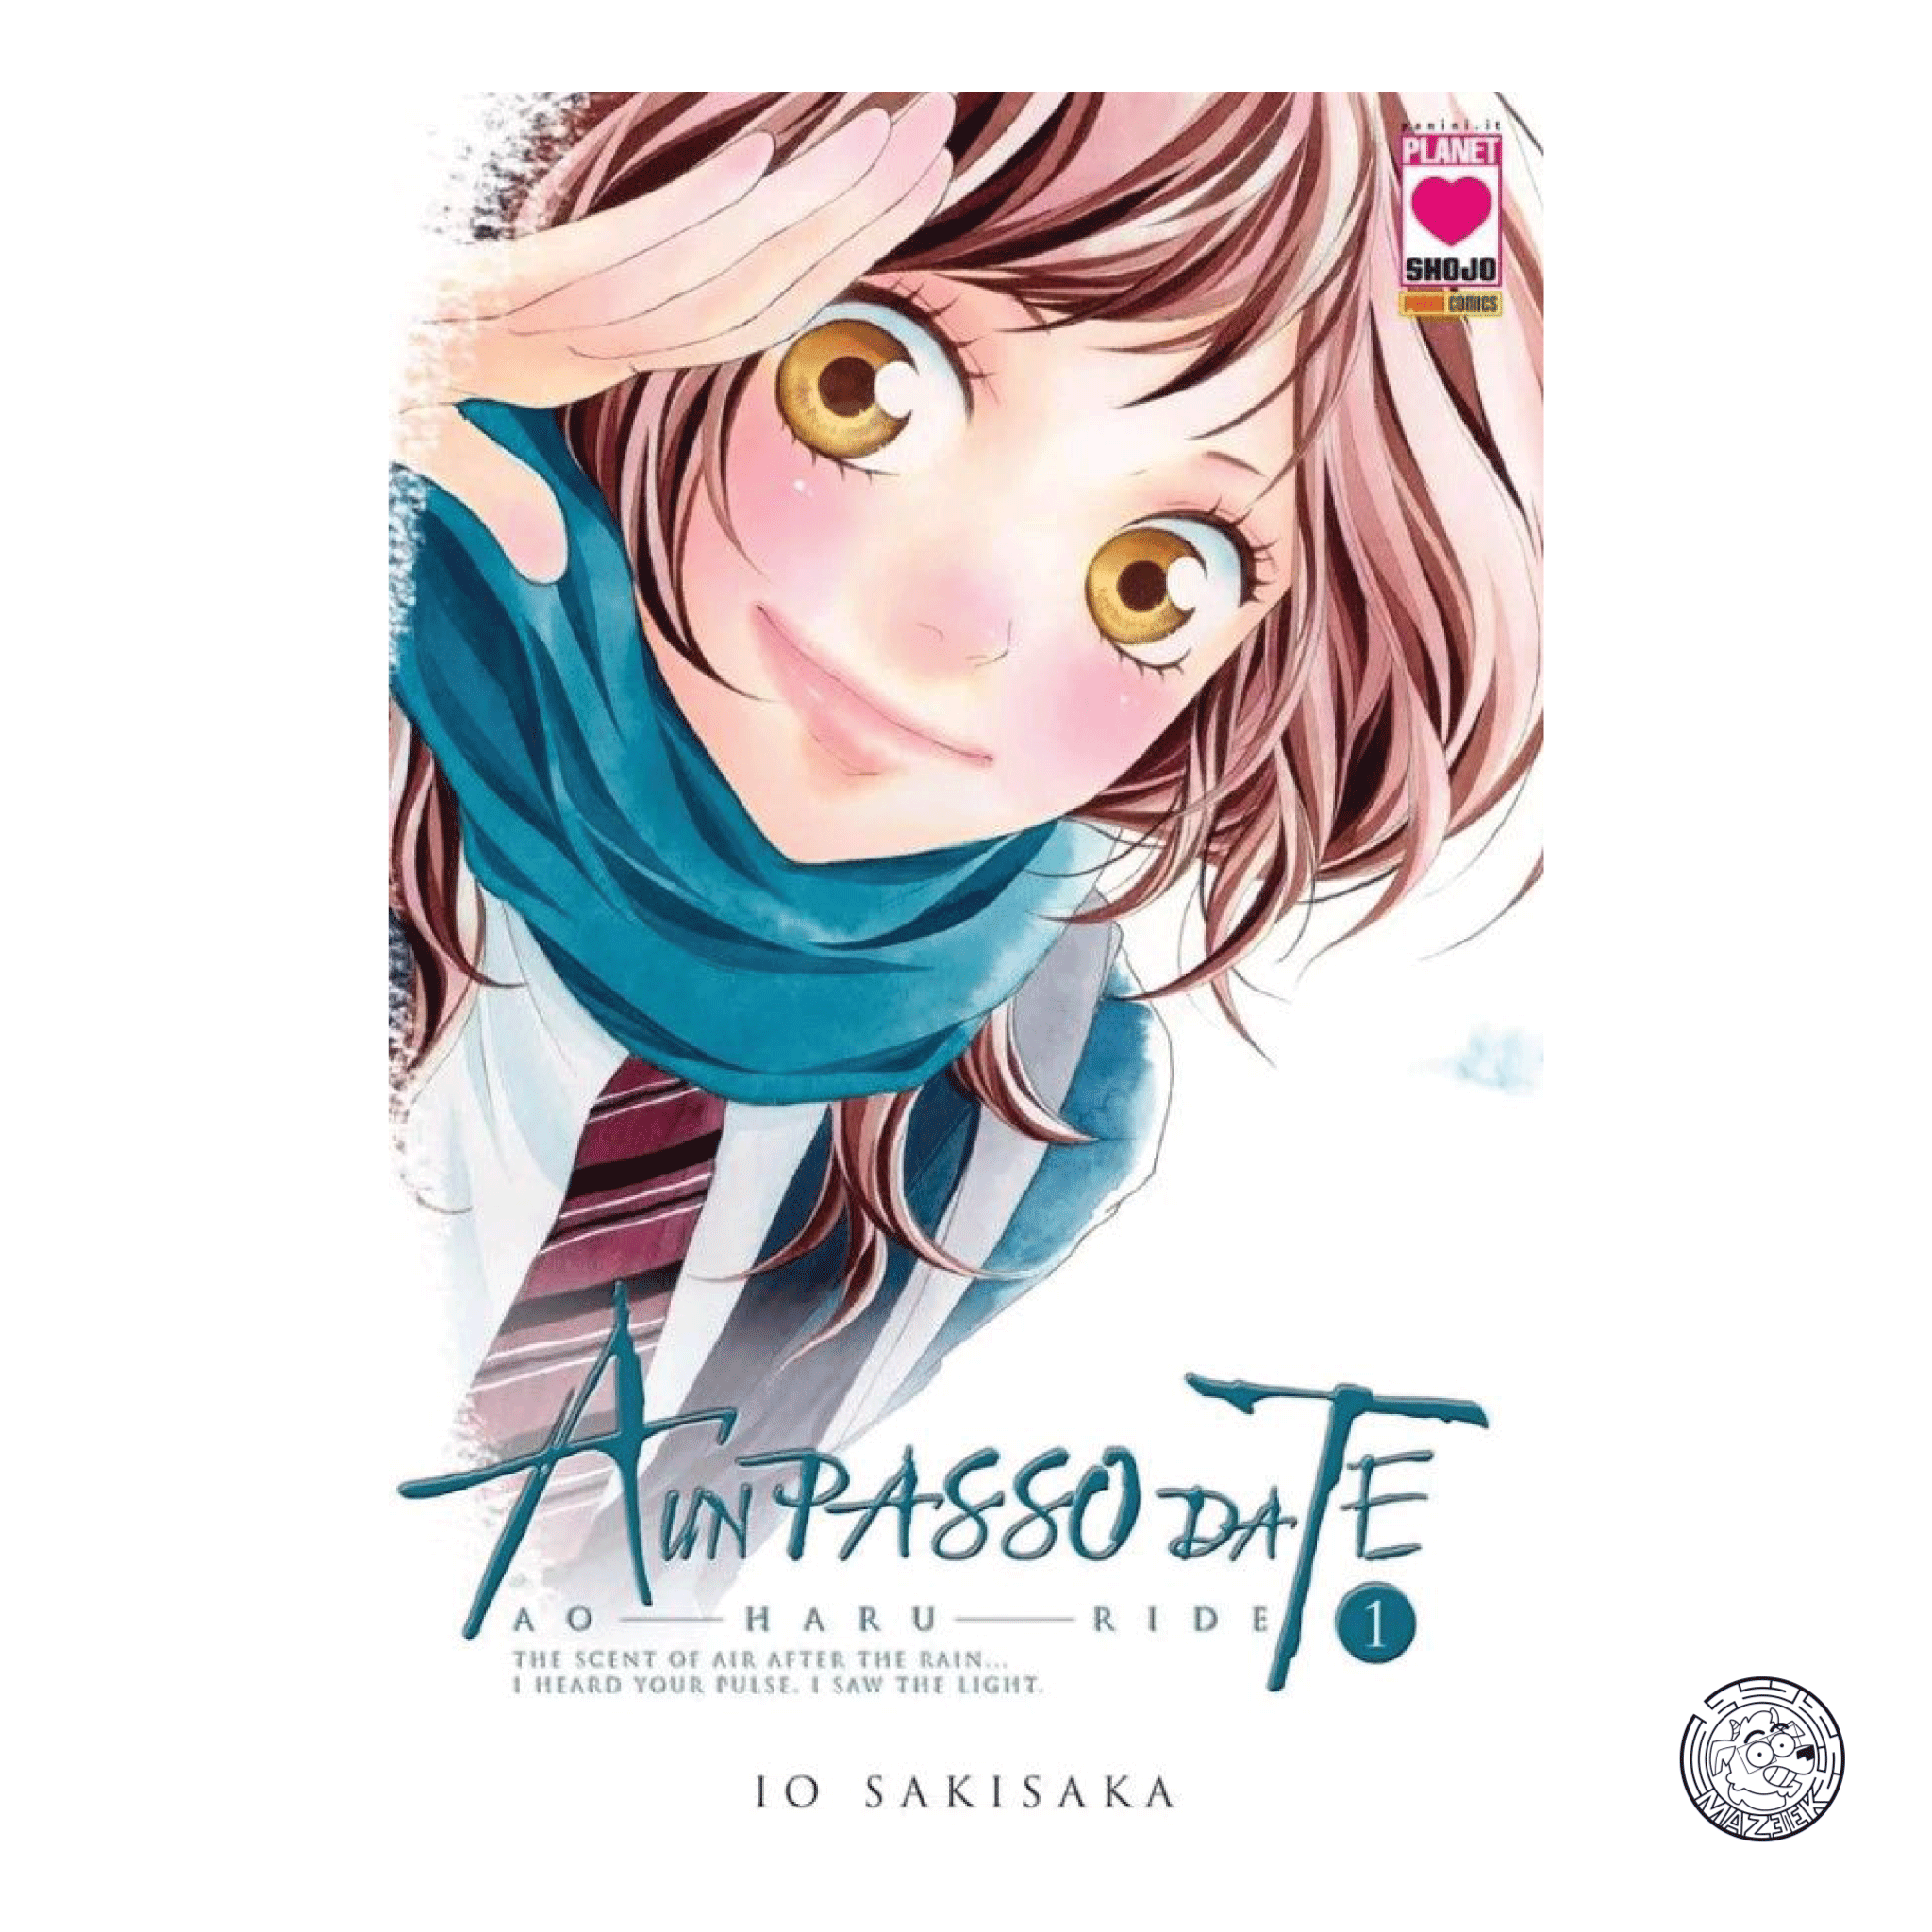 One step away from you: AO HARU RIDE 01 - Fifth Reprint